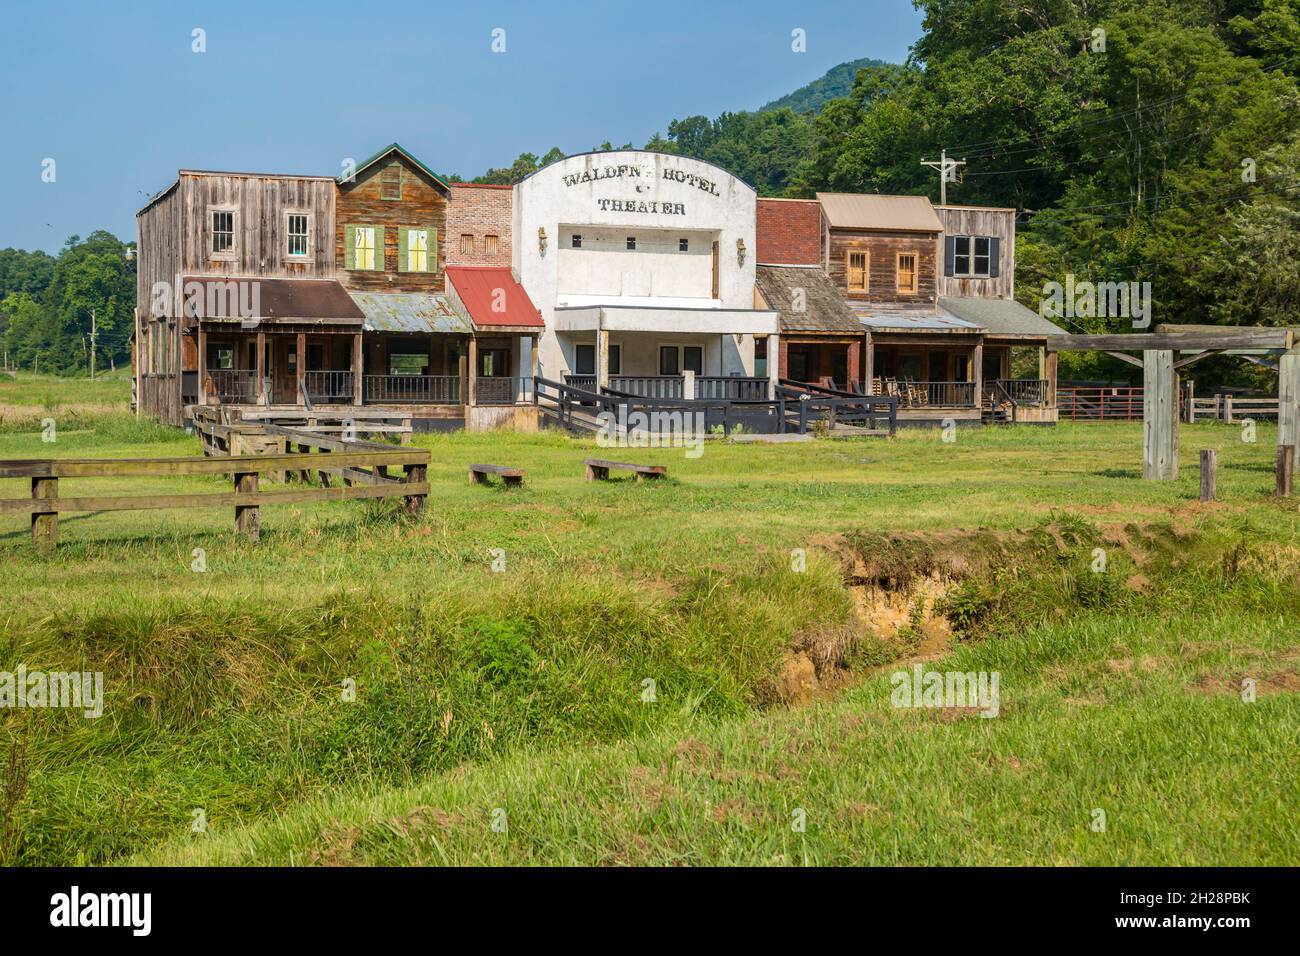 Old Walden's Hotel and Theatre Requisiten in Walden Creek Stables in Pigeon Forge, Tennessee Stockfoto